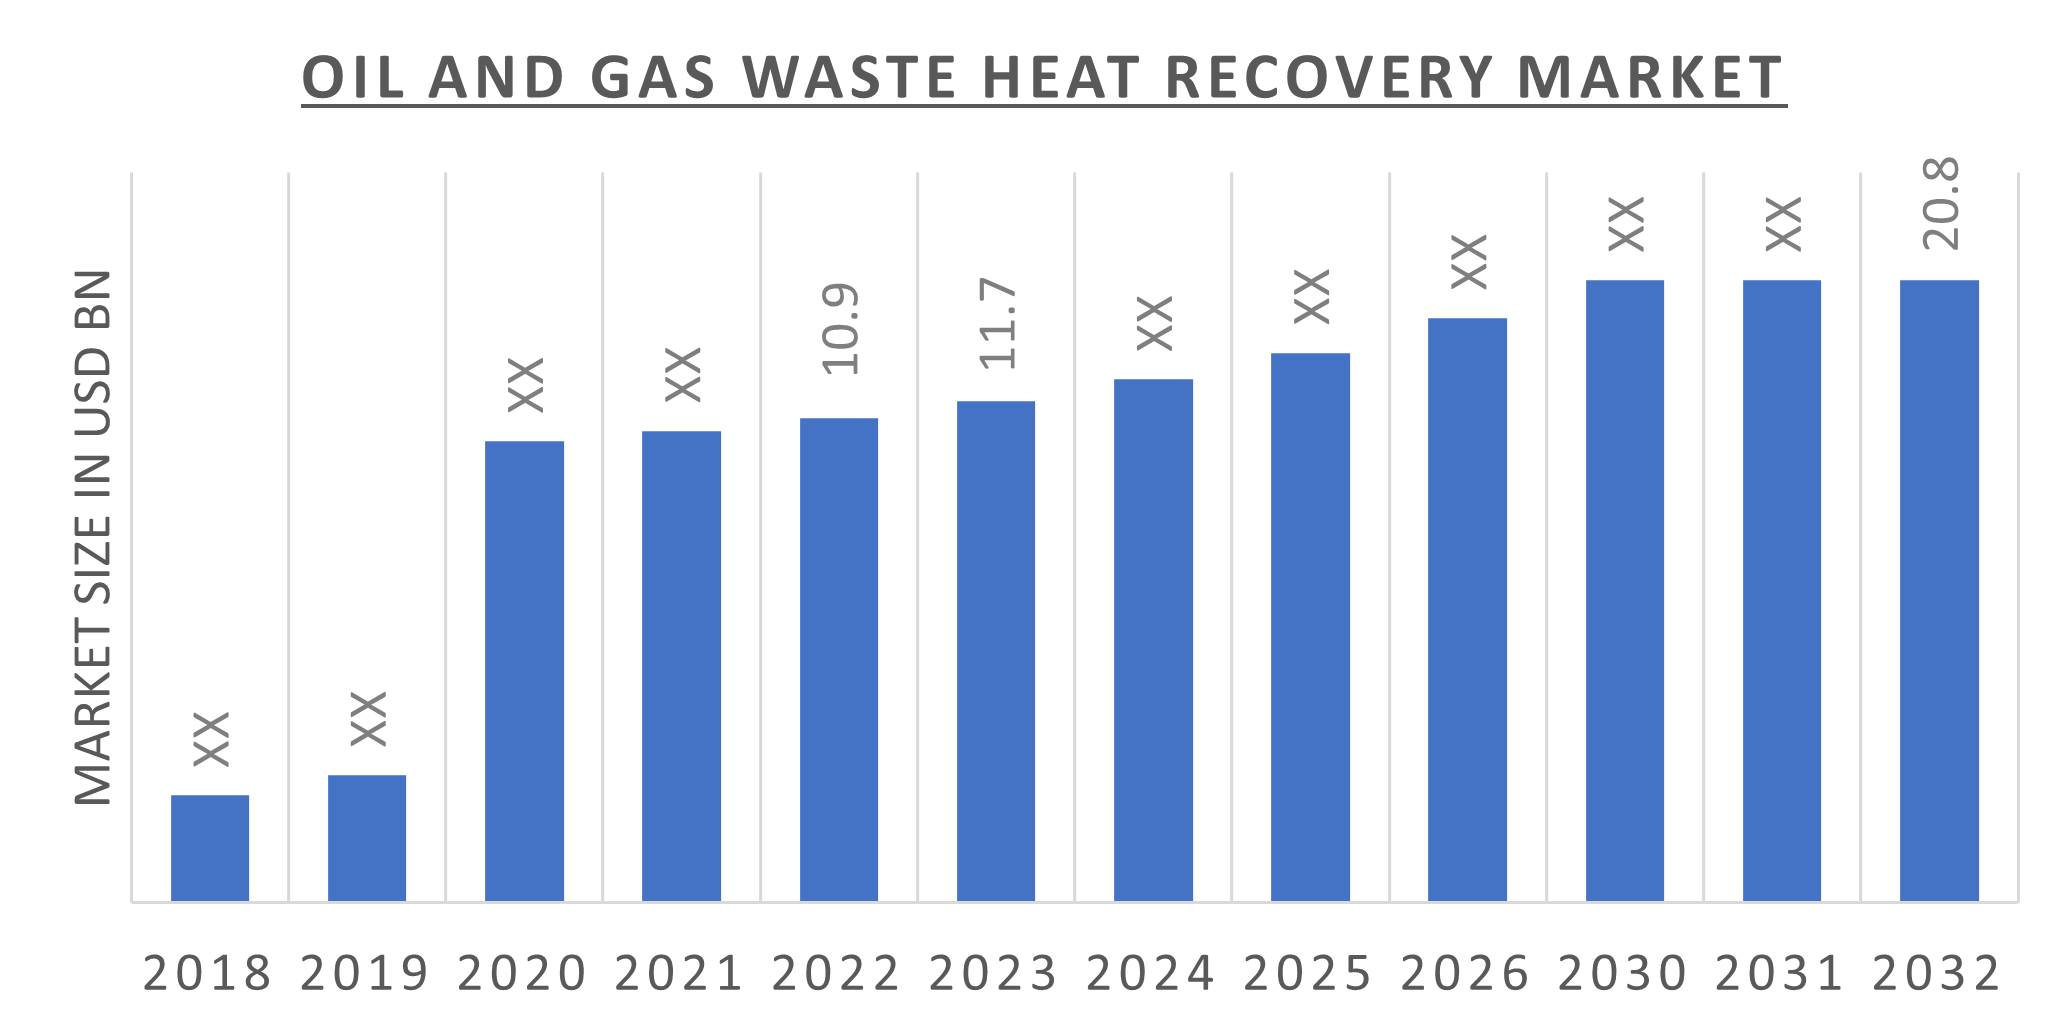 Global Oil and Gas Waste Heat Recovery Market Overview